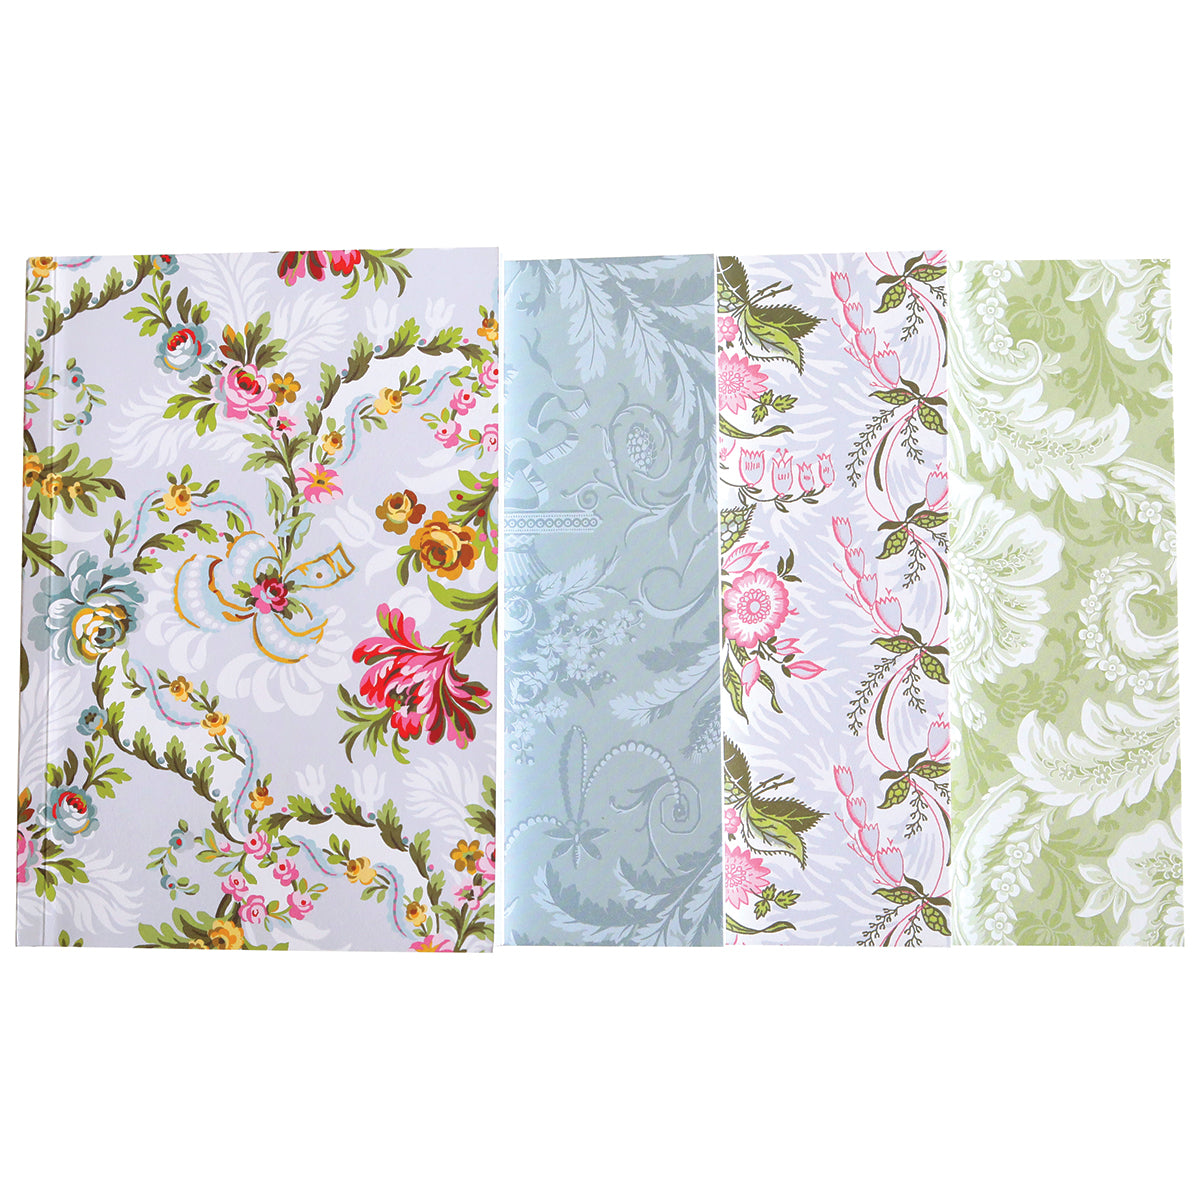 Three panels of Phoebe Floral Notebook Set designs with varying background colors and patterns, each size resembling pages from lined notebooks.